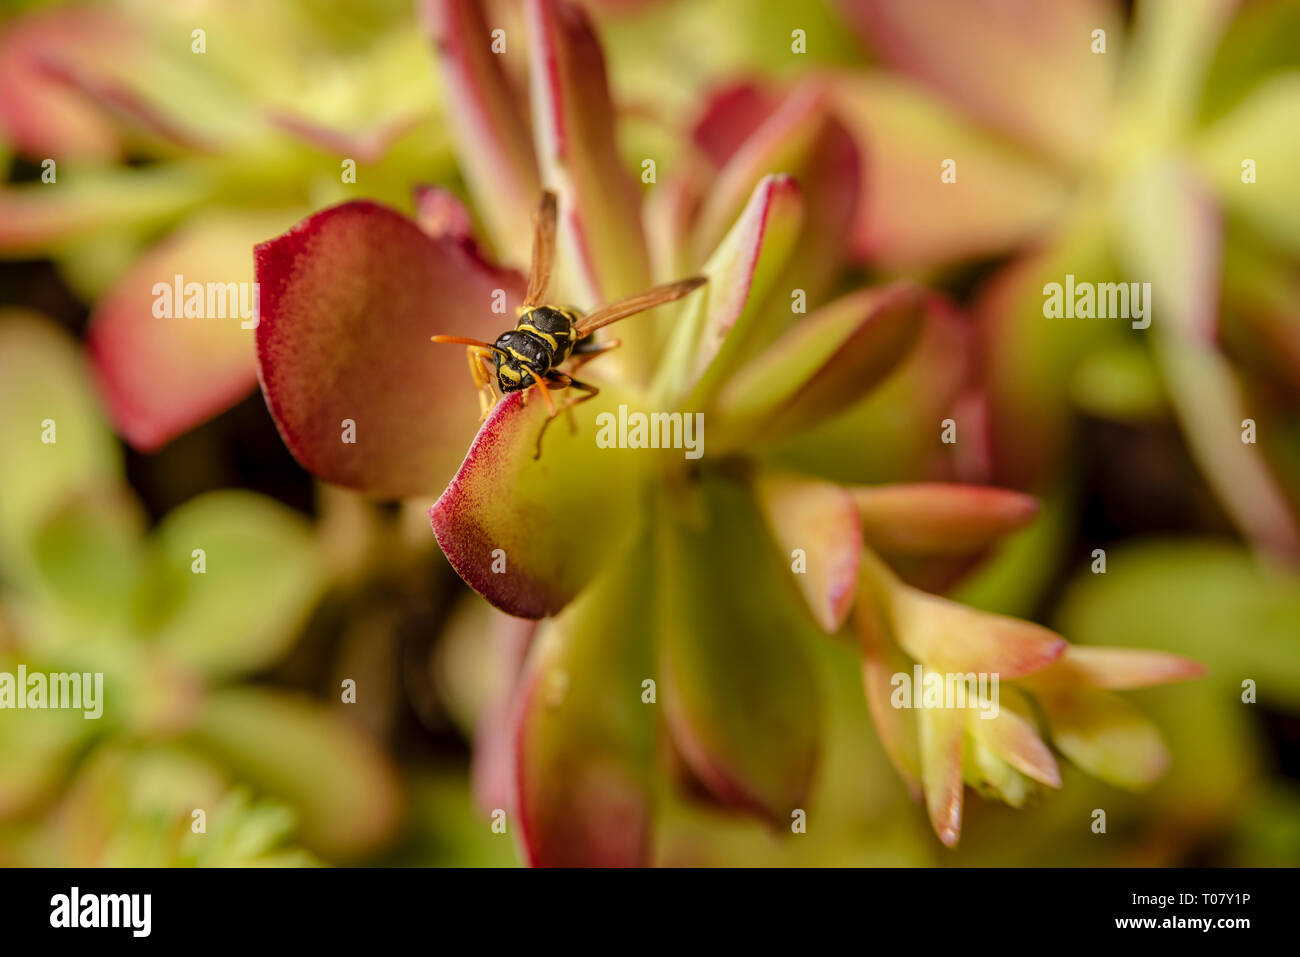 Paper wasp on succulent plant leave Stock Photo